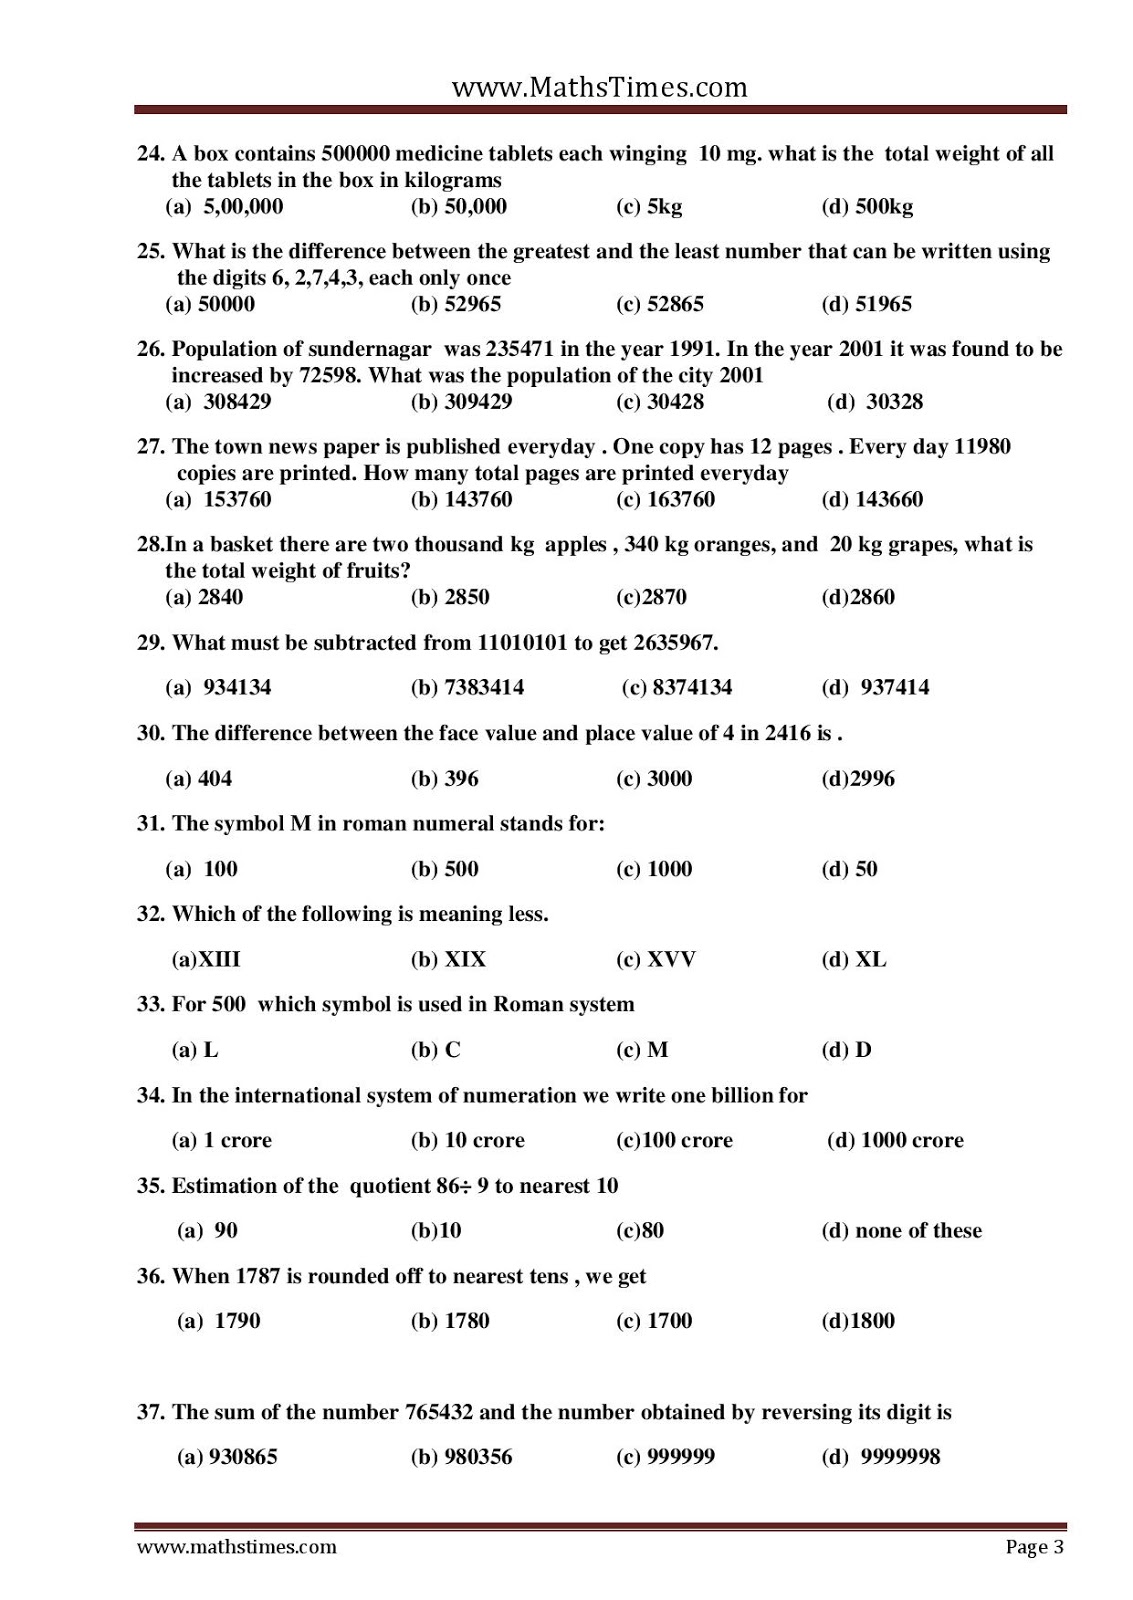 apsg-class-6-work-sheet-knowing-our-numbers